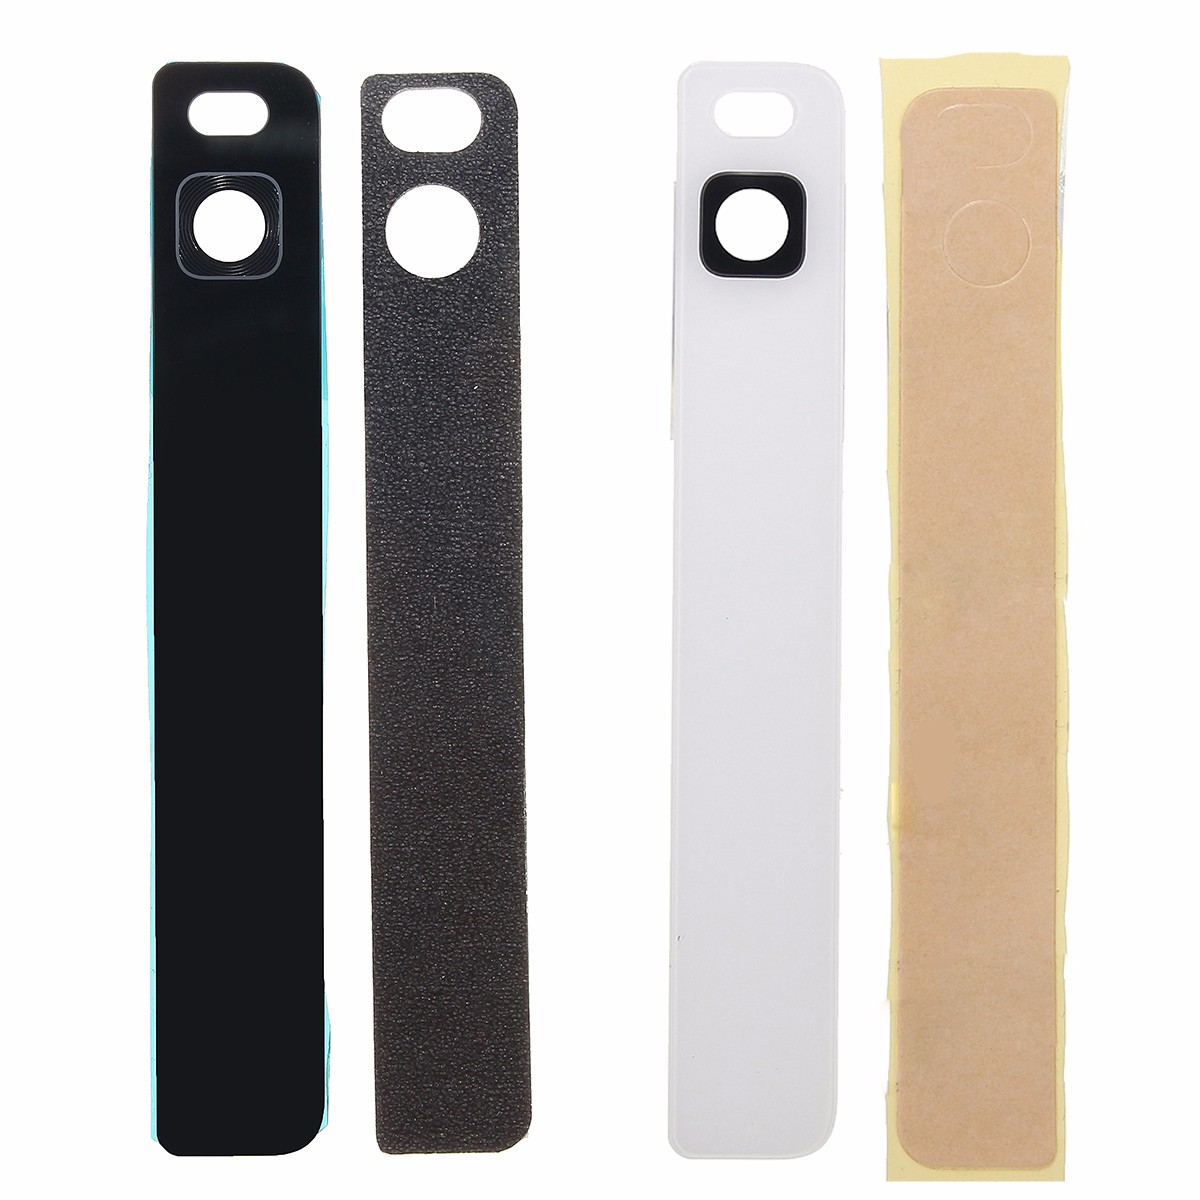 

Black/White Rear Back Camera Glass Lens With Glue For Huawei Ascend P8 Standard